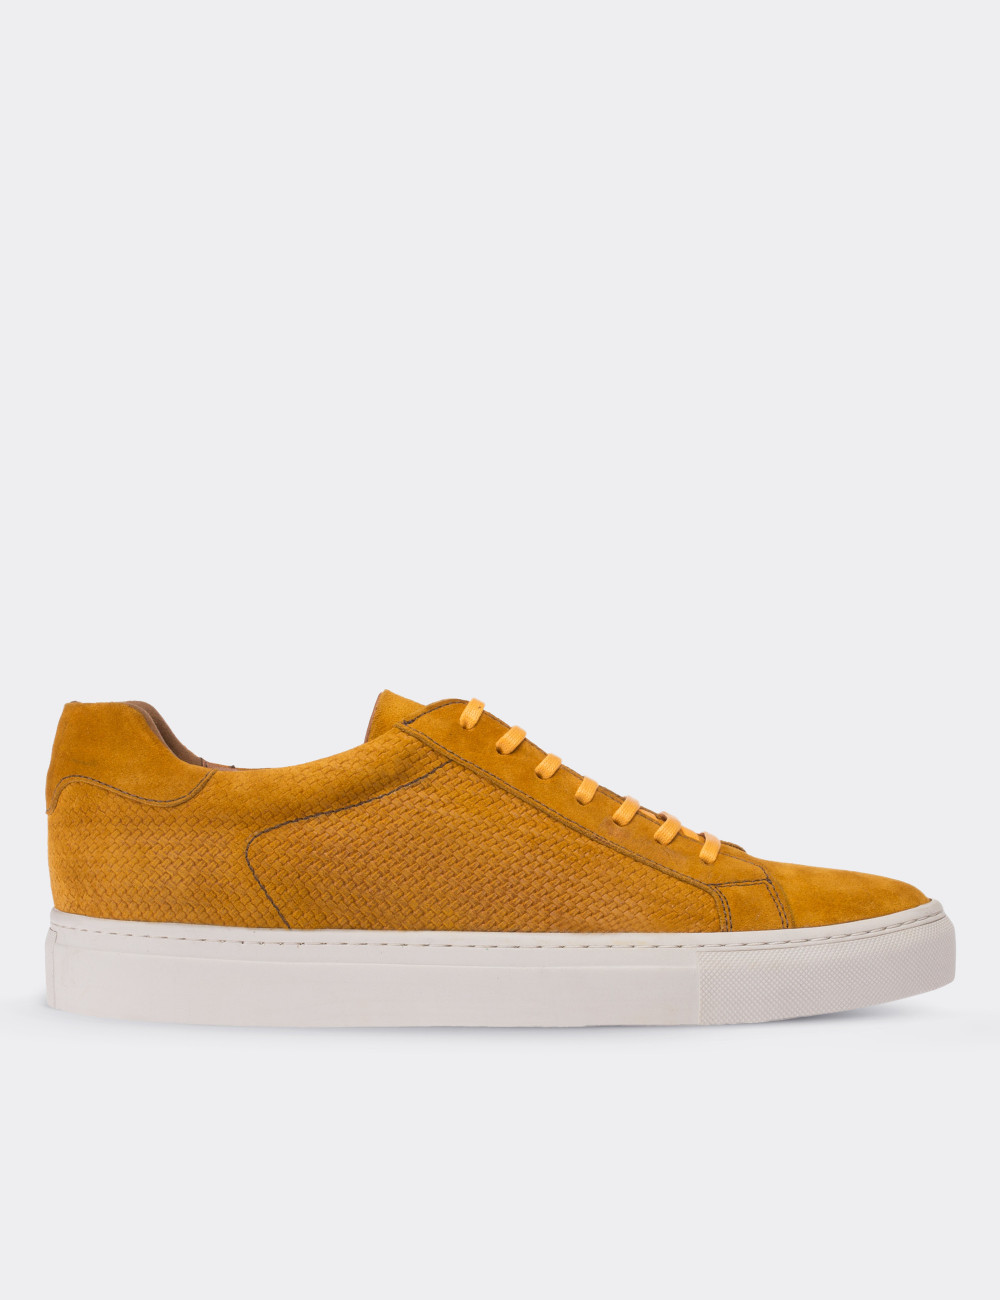 yellow suede shoes